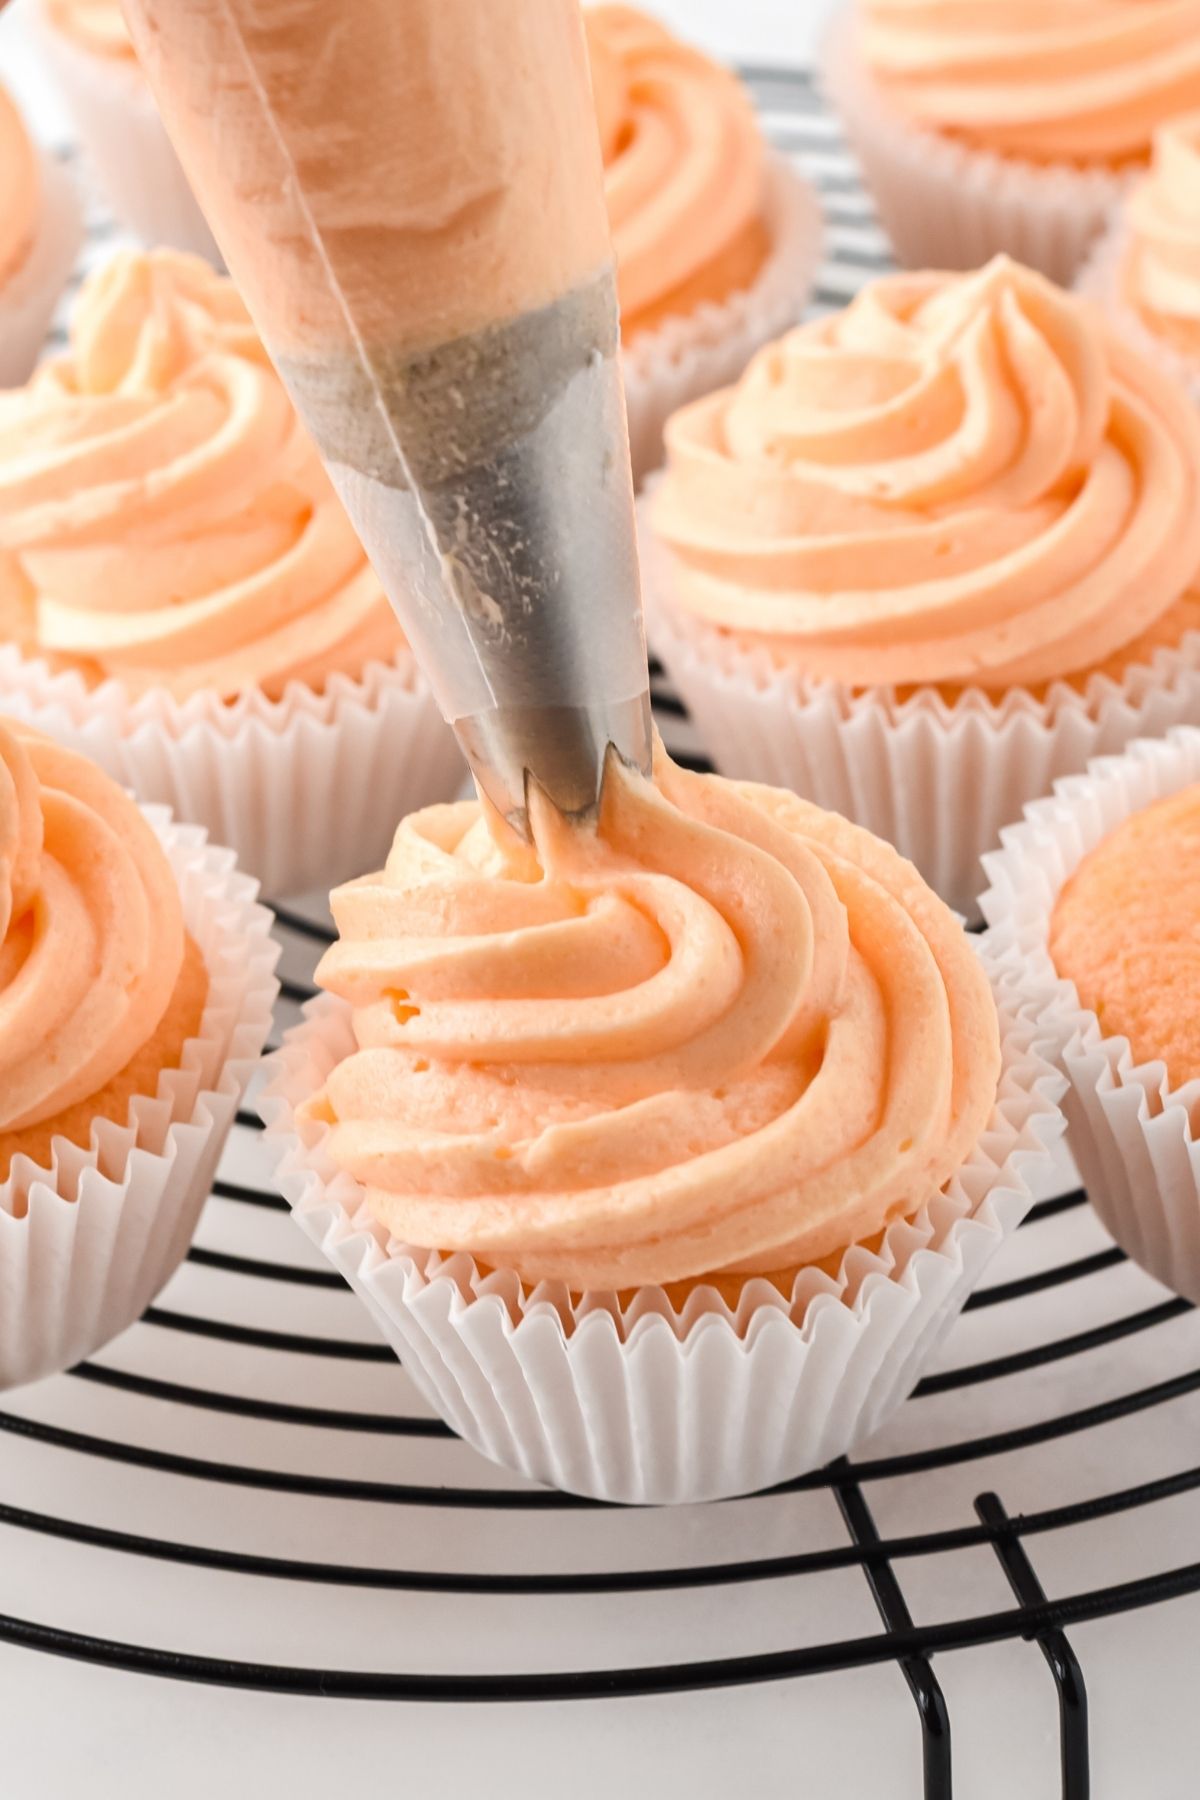 piping bag frosting orange frosting on cupcakes